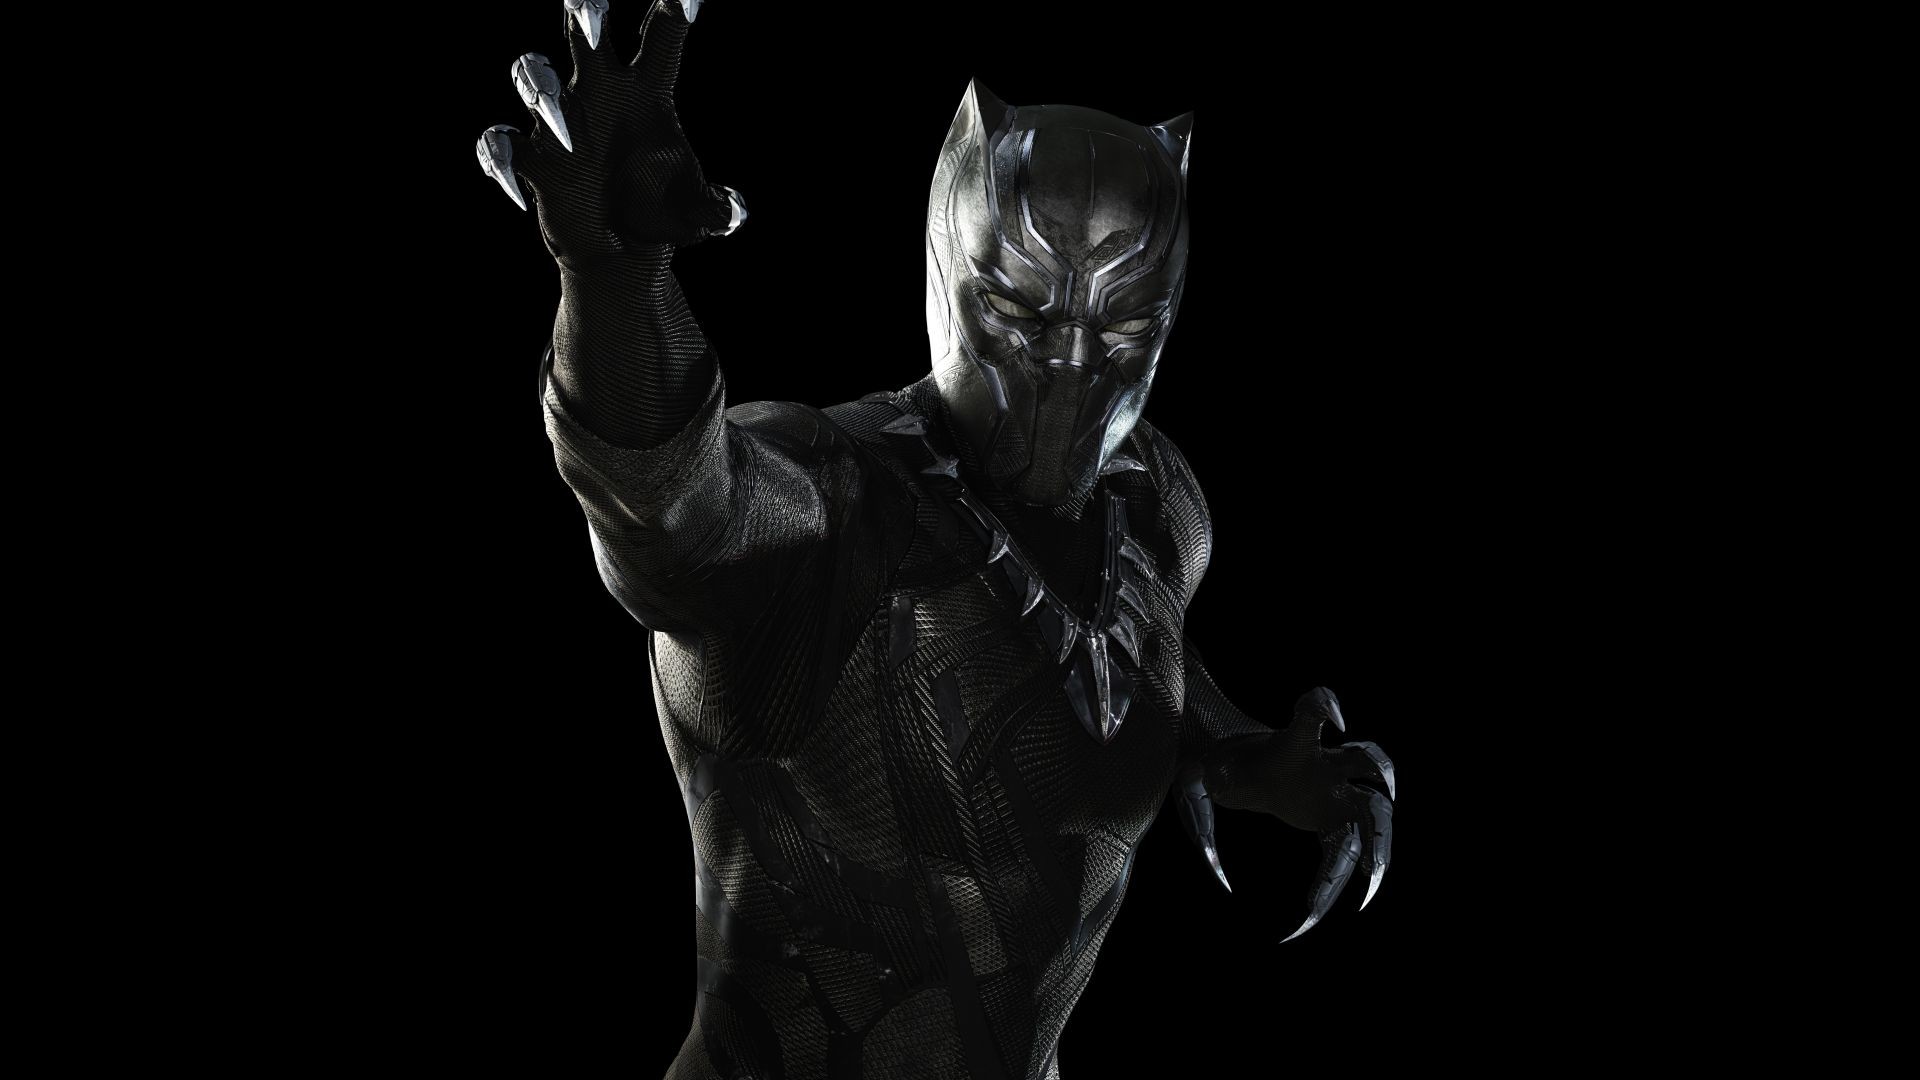 1920x1080 Awesome Black Panther Iphone Wallpaper On Windows 7 Wallpaper with Black  Panther Iphone Wallpaper Download HD